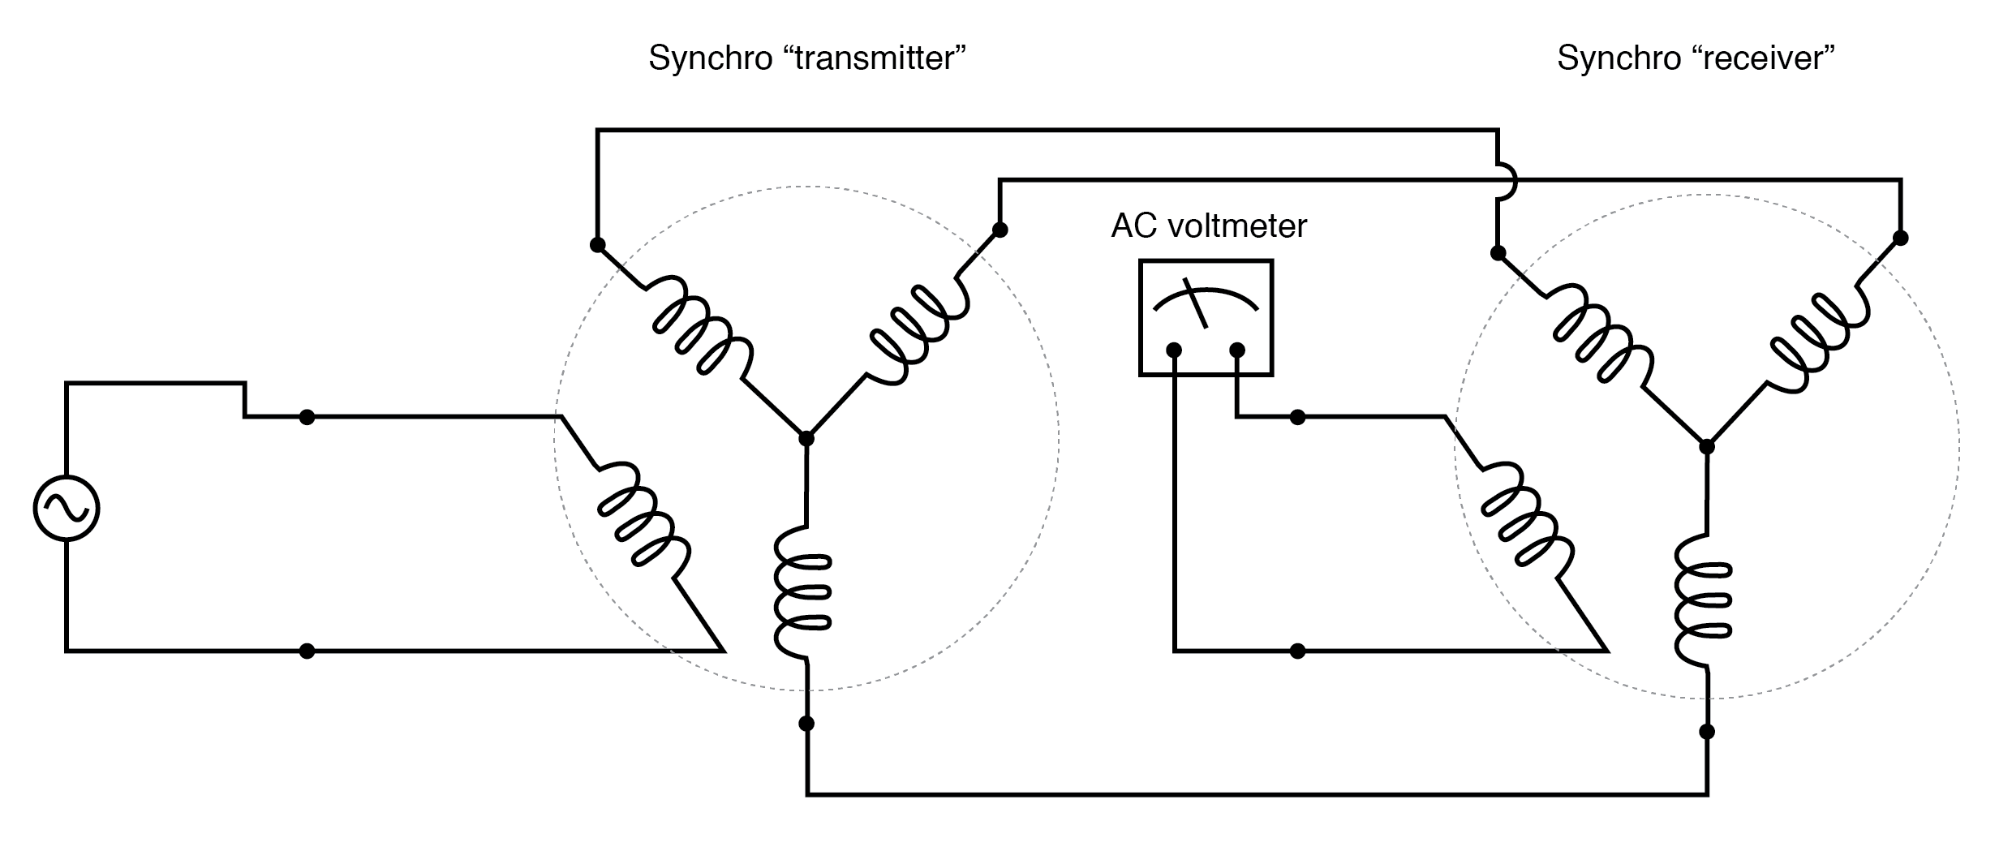 AC voltmeter registers voltage if the receiver rotor is not rotated exactly 90 or 270 degrees from the transmitter rotor.